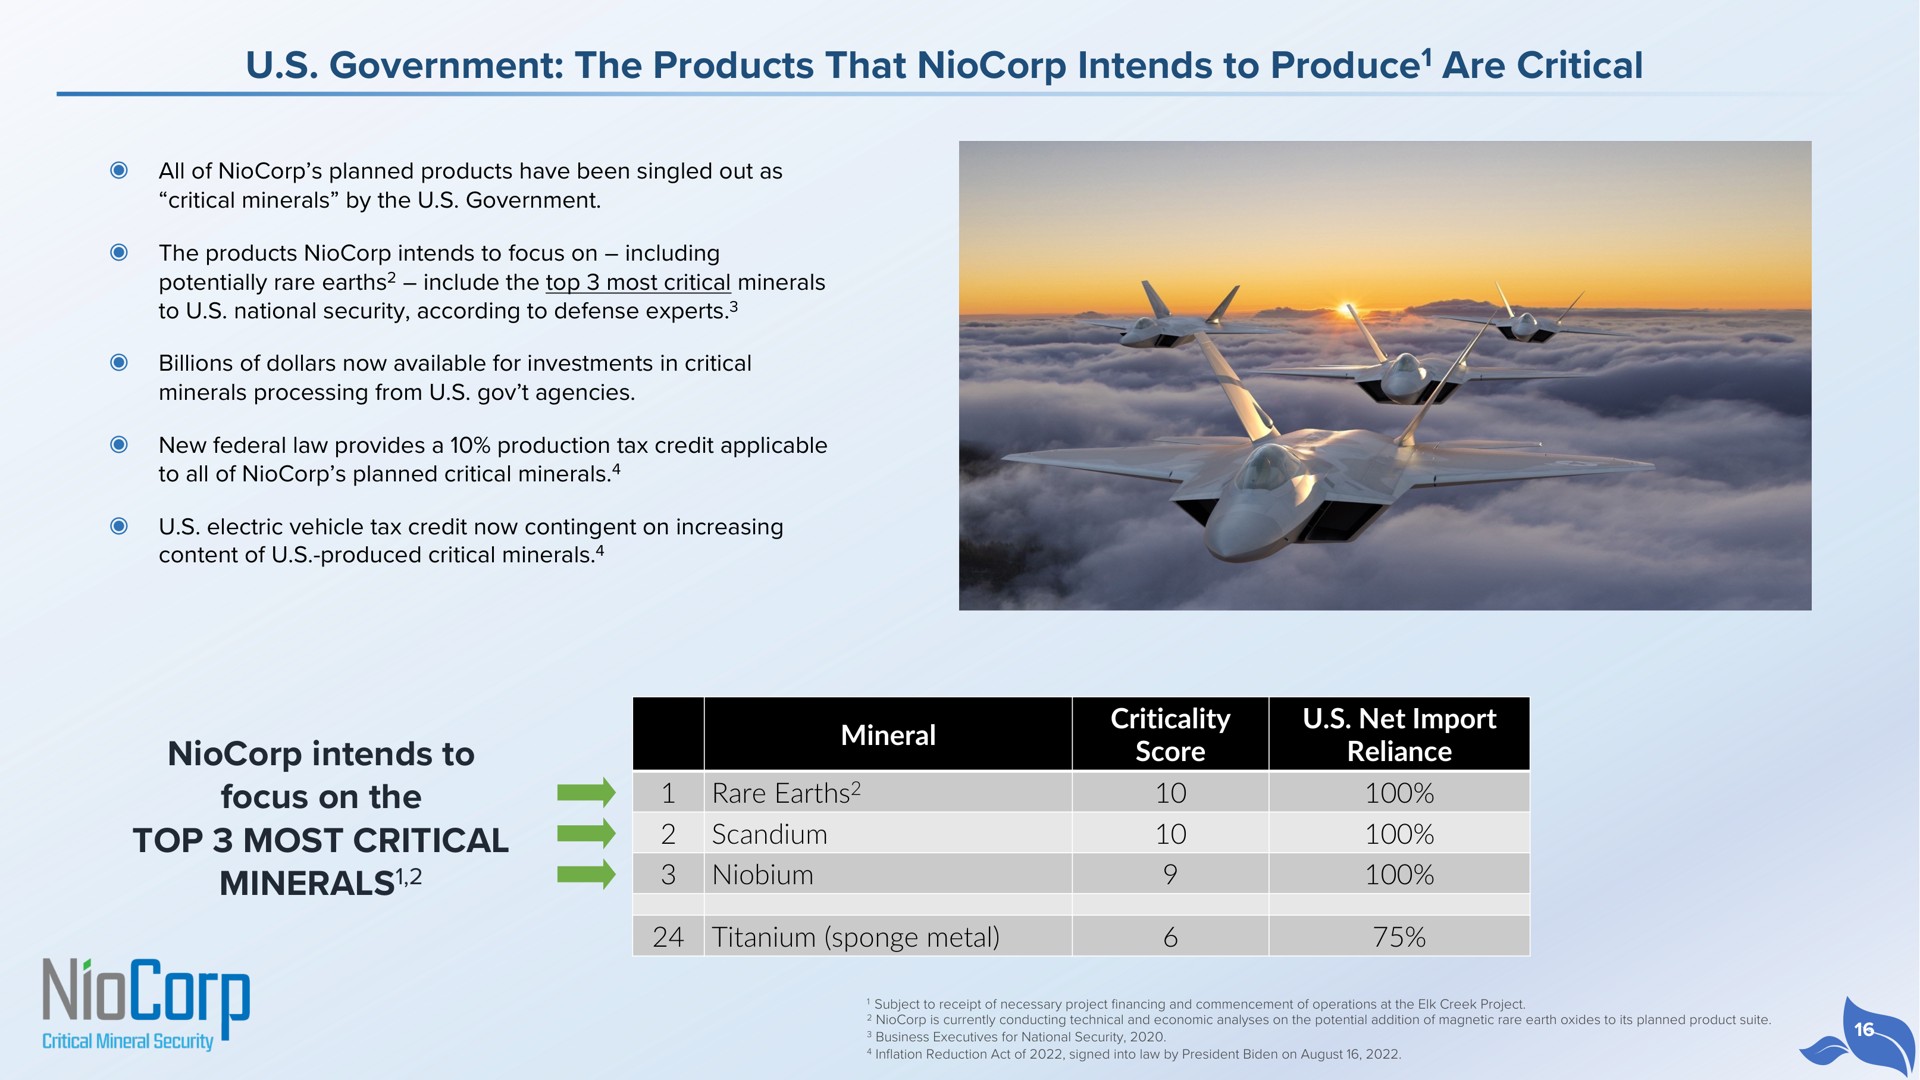 government the products that intends to produce are critical intends to focus on the top most critical minerals produce minerals rare earths scandium niobium bile ore | NioCorp